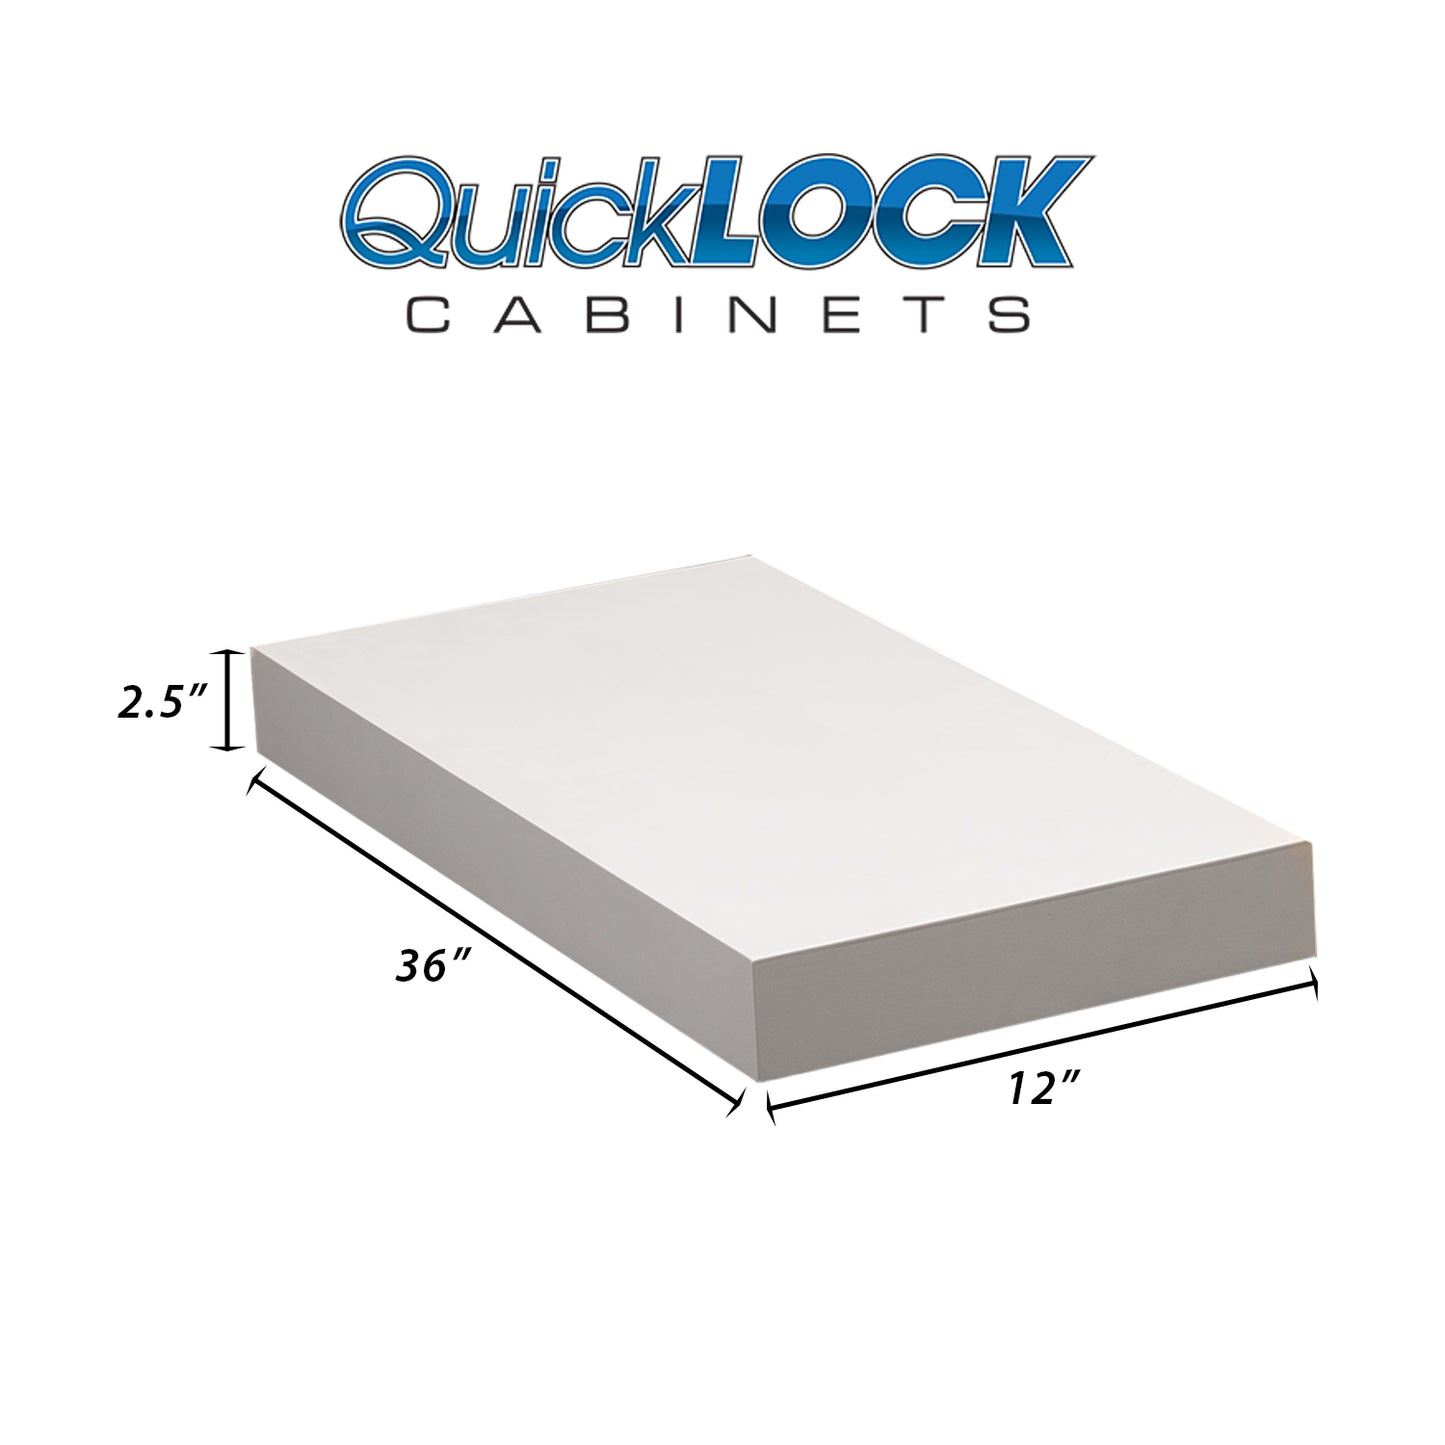 Quicklock Cabinets Floating Shelves | 2.5" Thick | Pure White, 12" D x 36" W x 2.5" H | American Made | Hardwood Bracket | Complete Shelf Unit